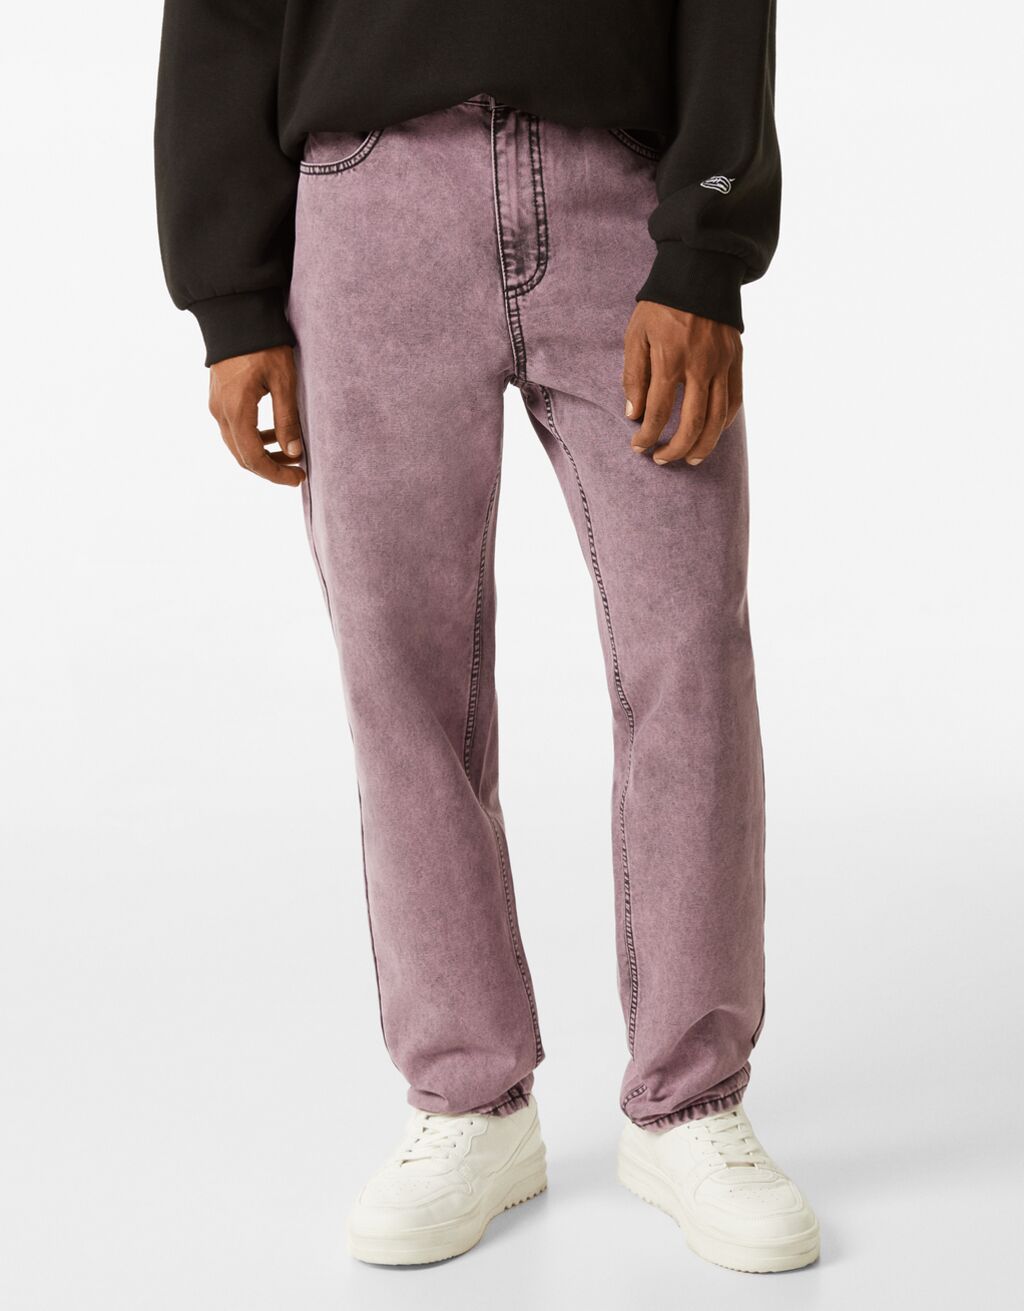 Faded canvas pants